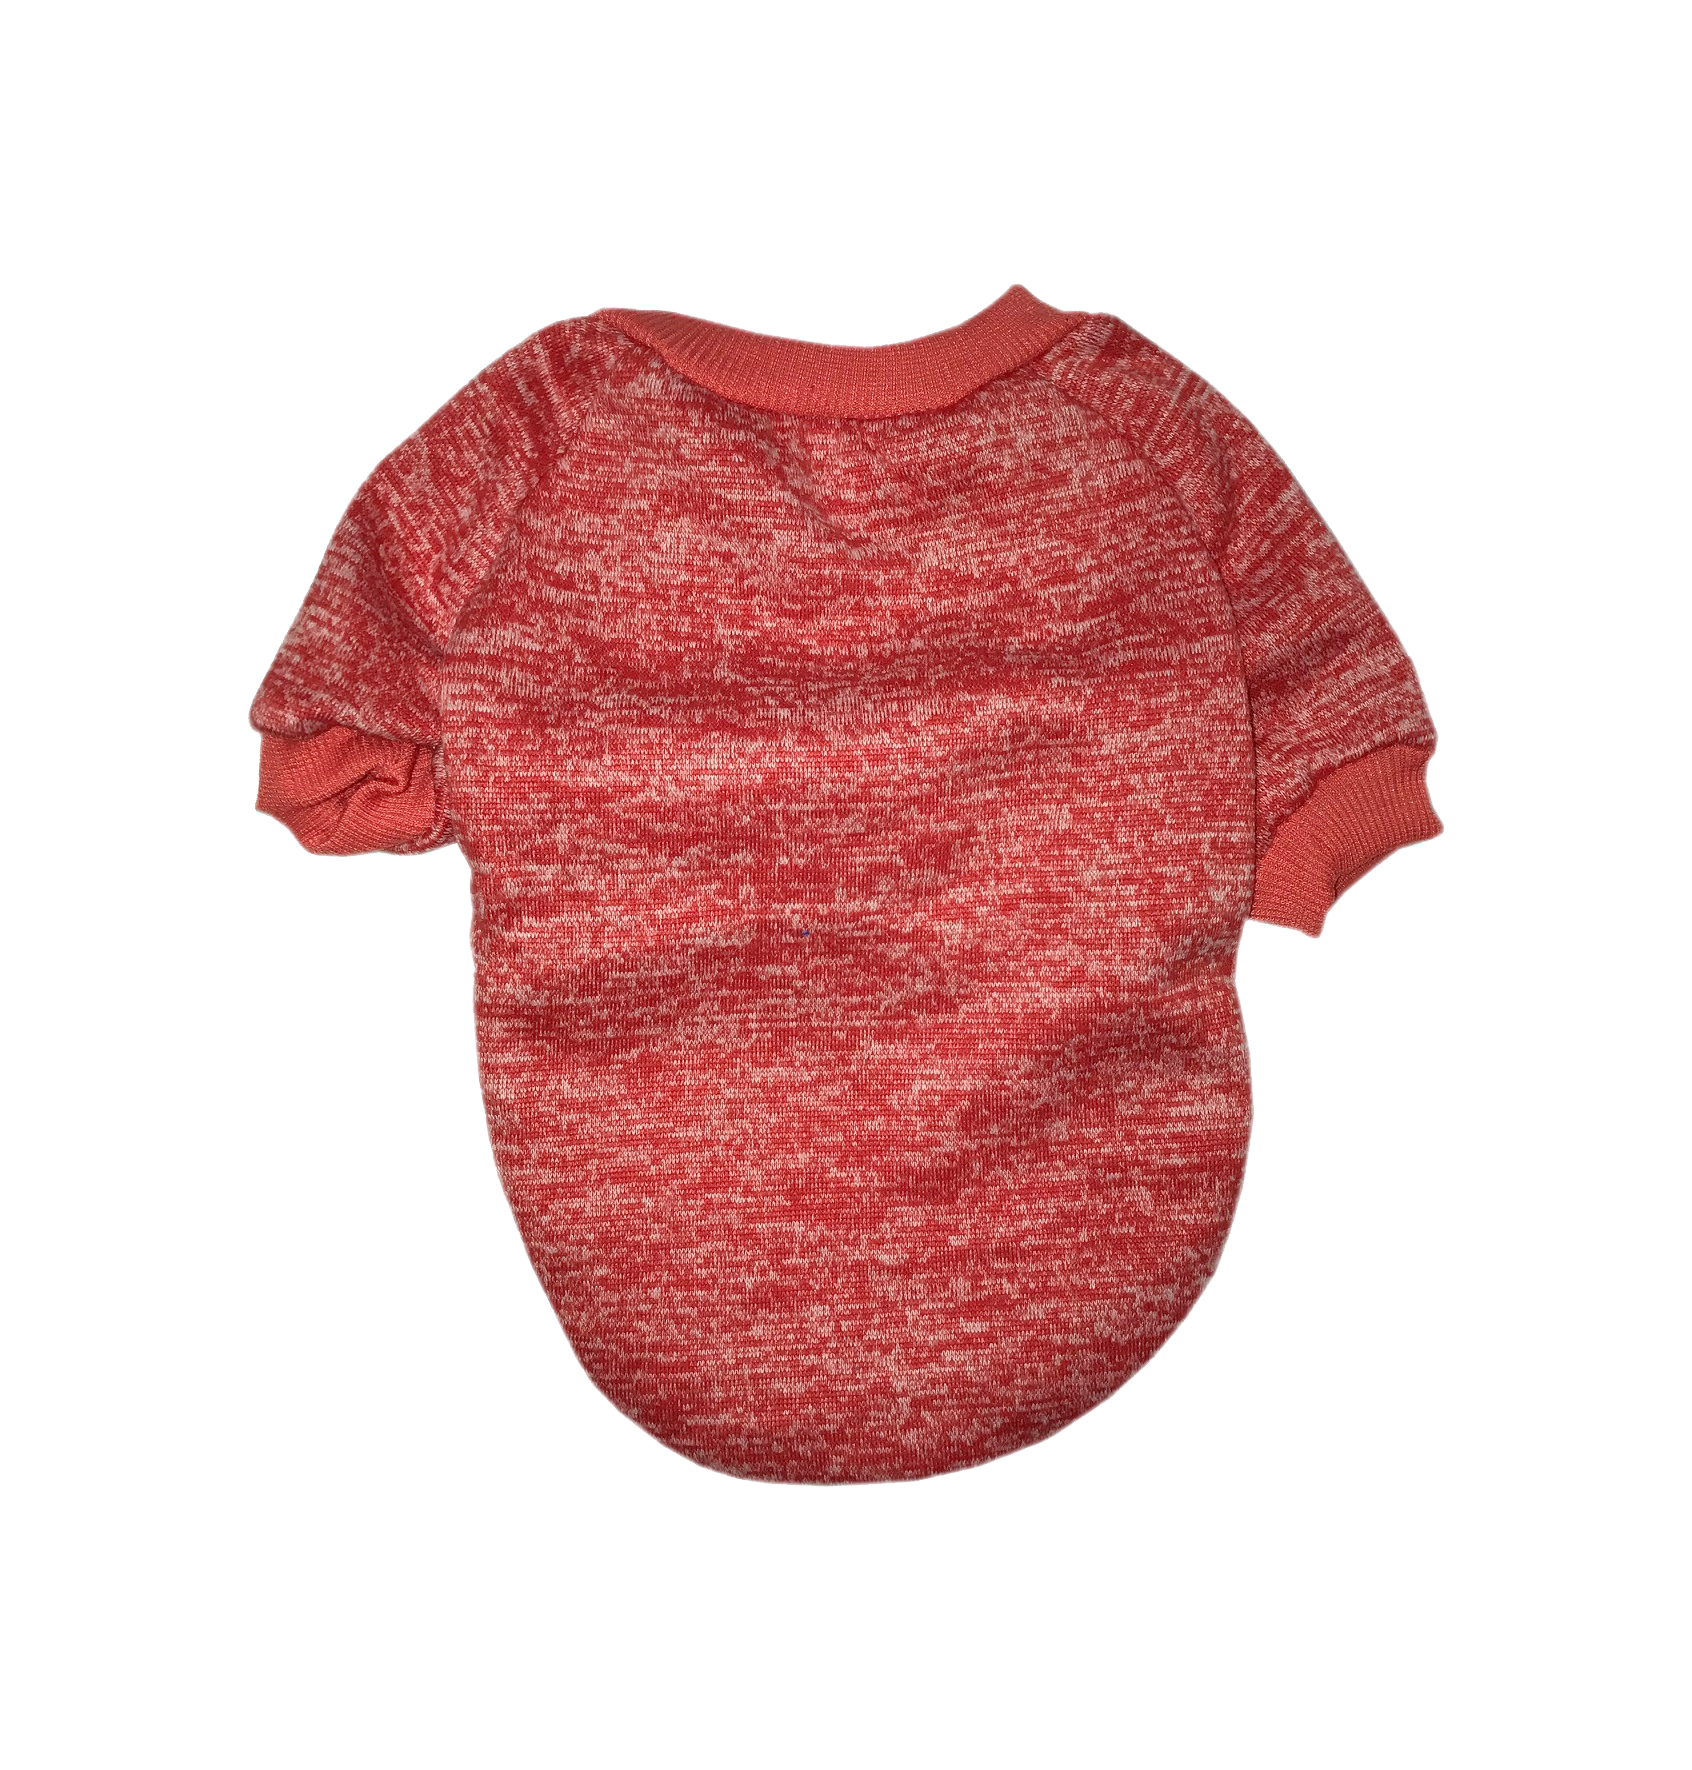 Dz-4222rd-xs Heathered Tee, Red - Extra Small